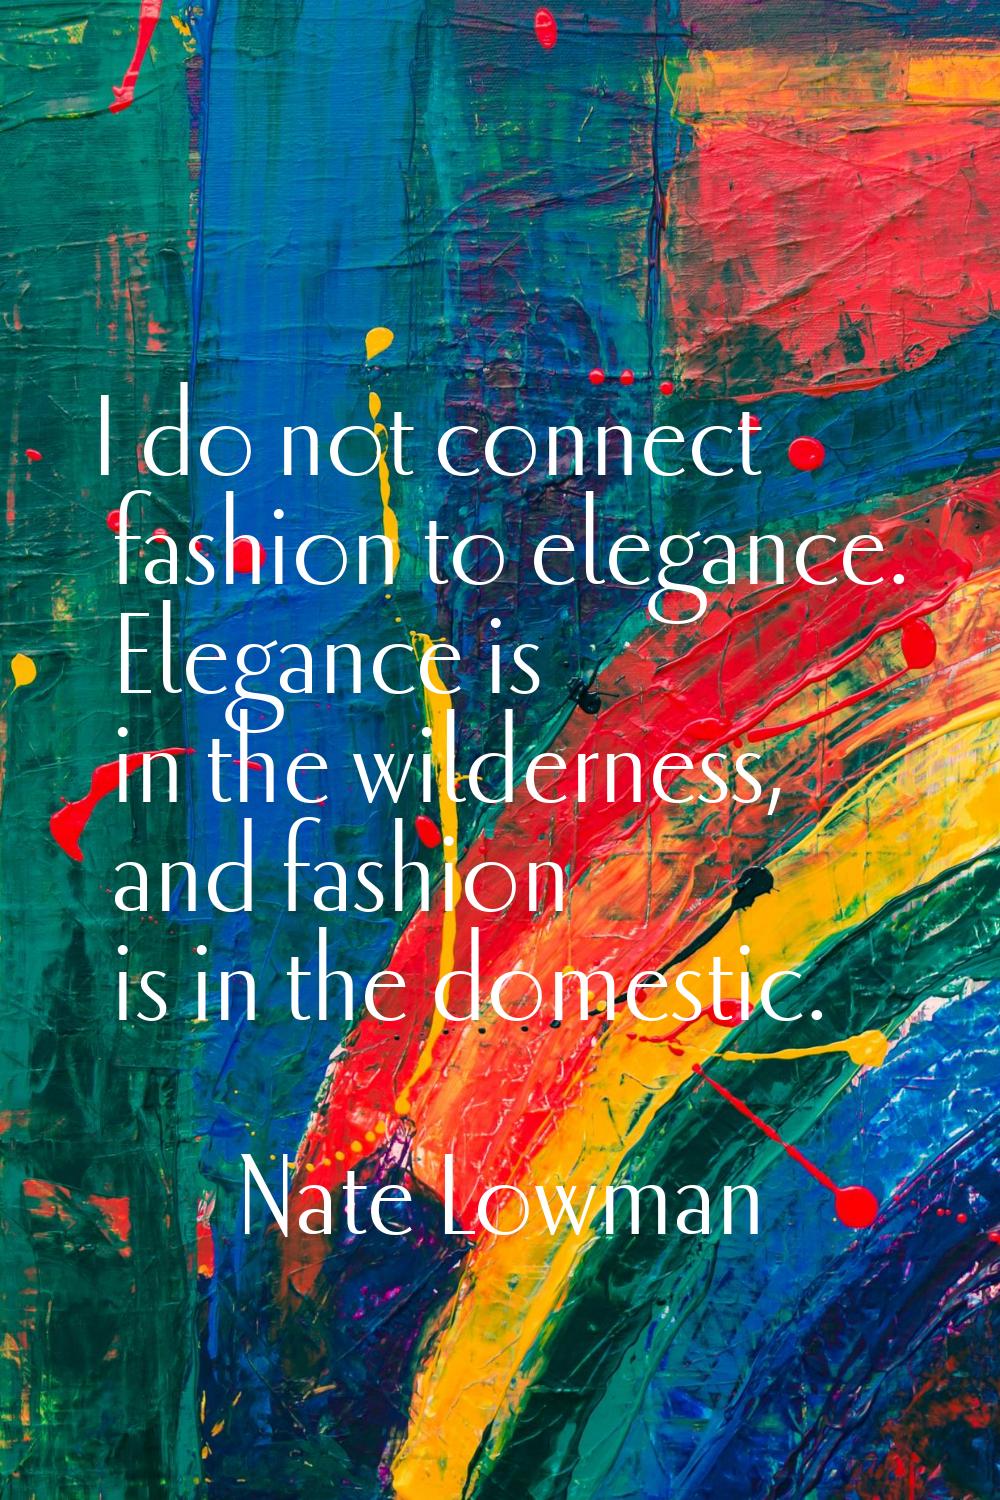 I do not connect fashion to elegance. Elegance is in the wilderness, and fashion is in the domestic